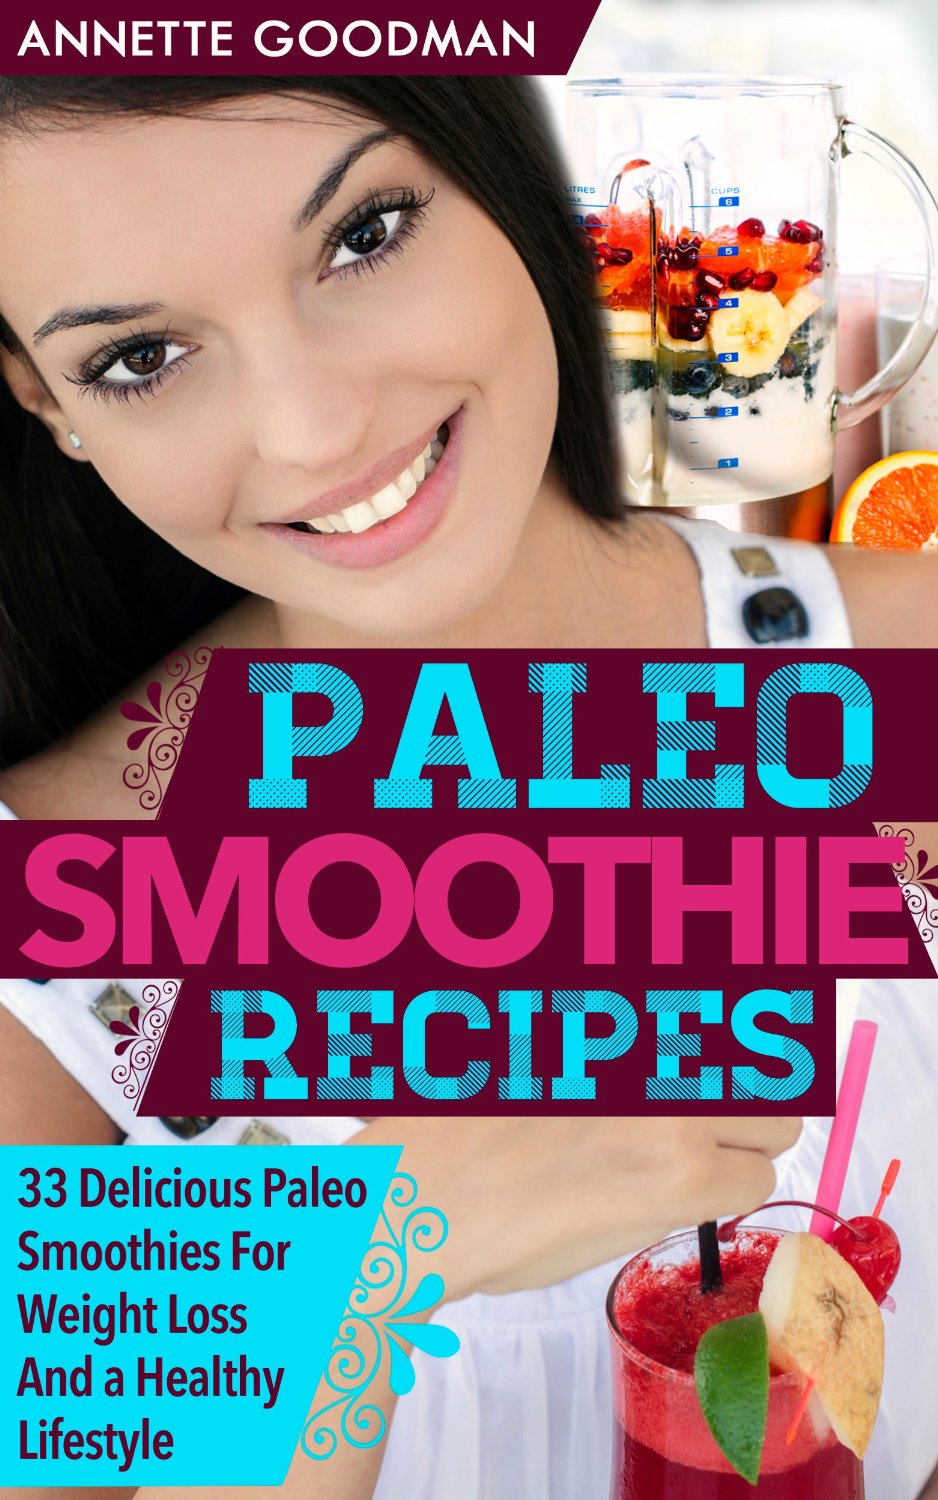 Paleo Smoothies: 33 Delicious Paleo Smoothie Recipes For Weight Loss And a Healthy Lifestyle by Annette Goodman